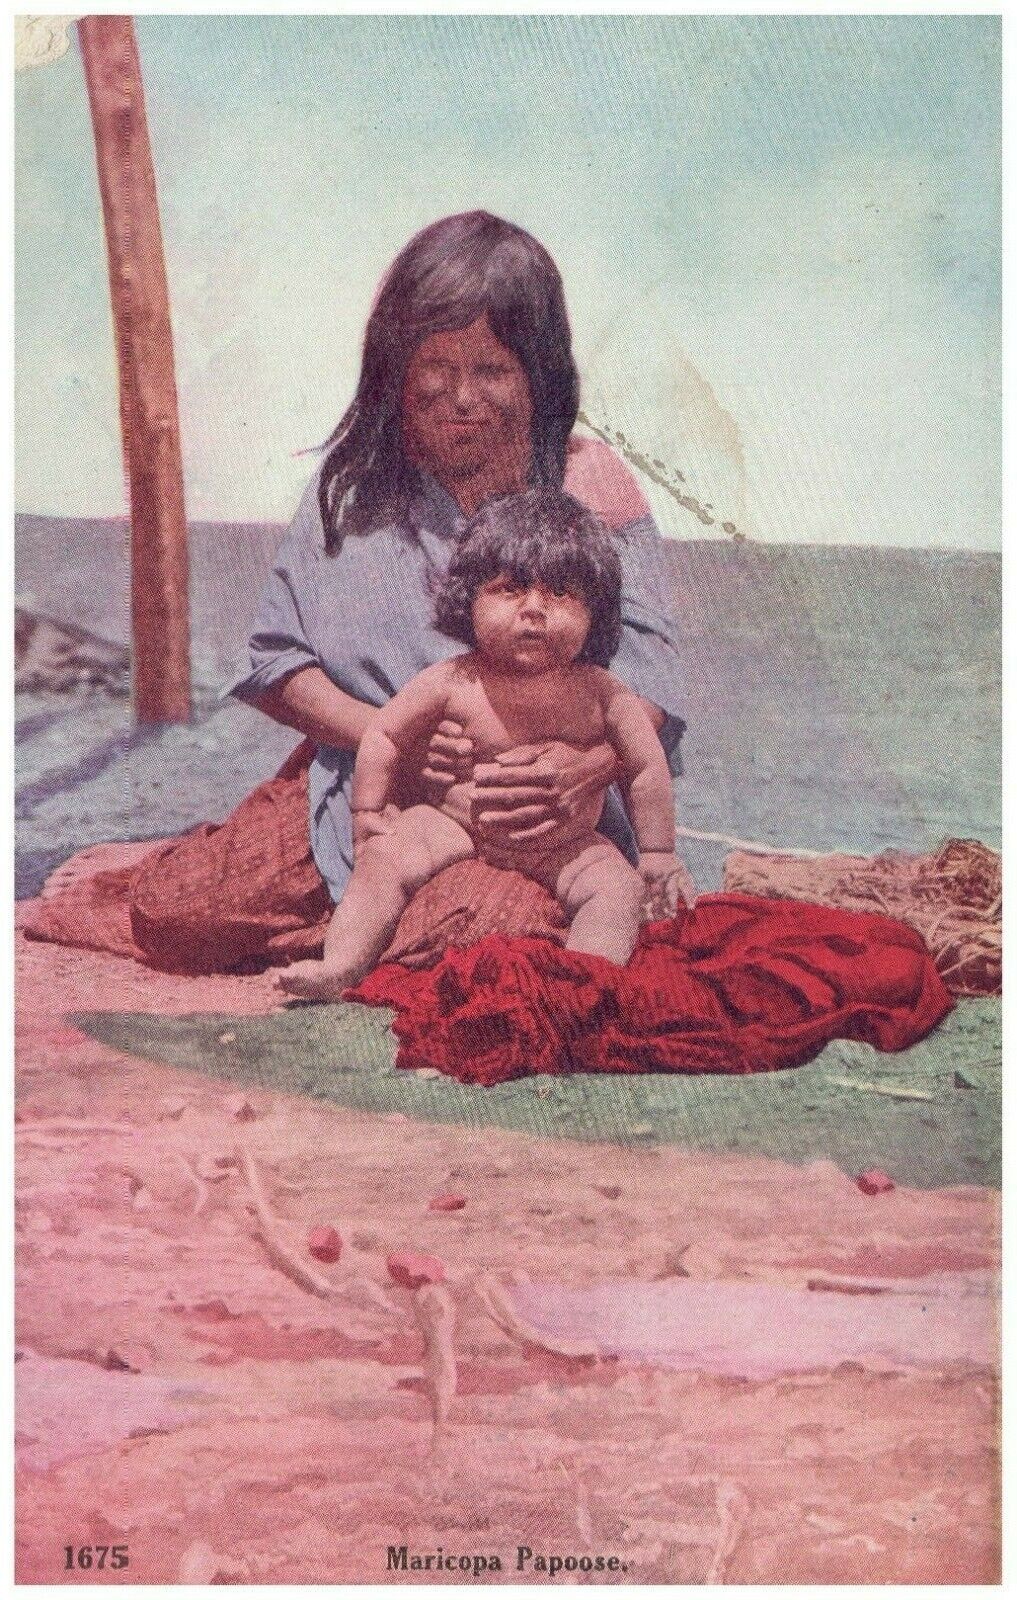 Maricopa Papoose Native American Indian Woman & Naked Baby 1912 Postcard